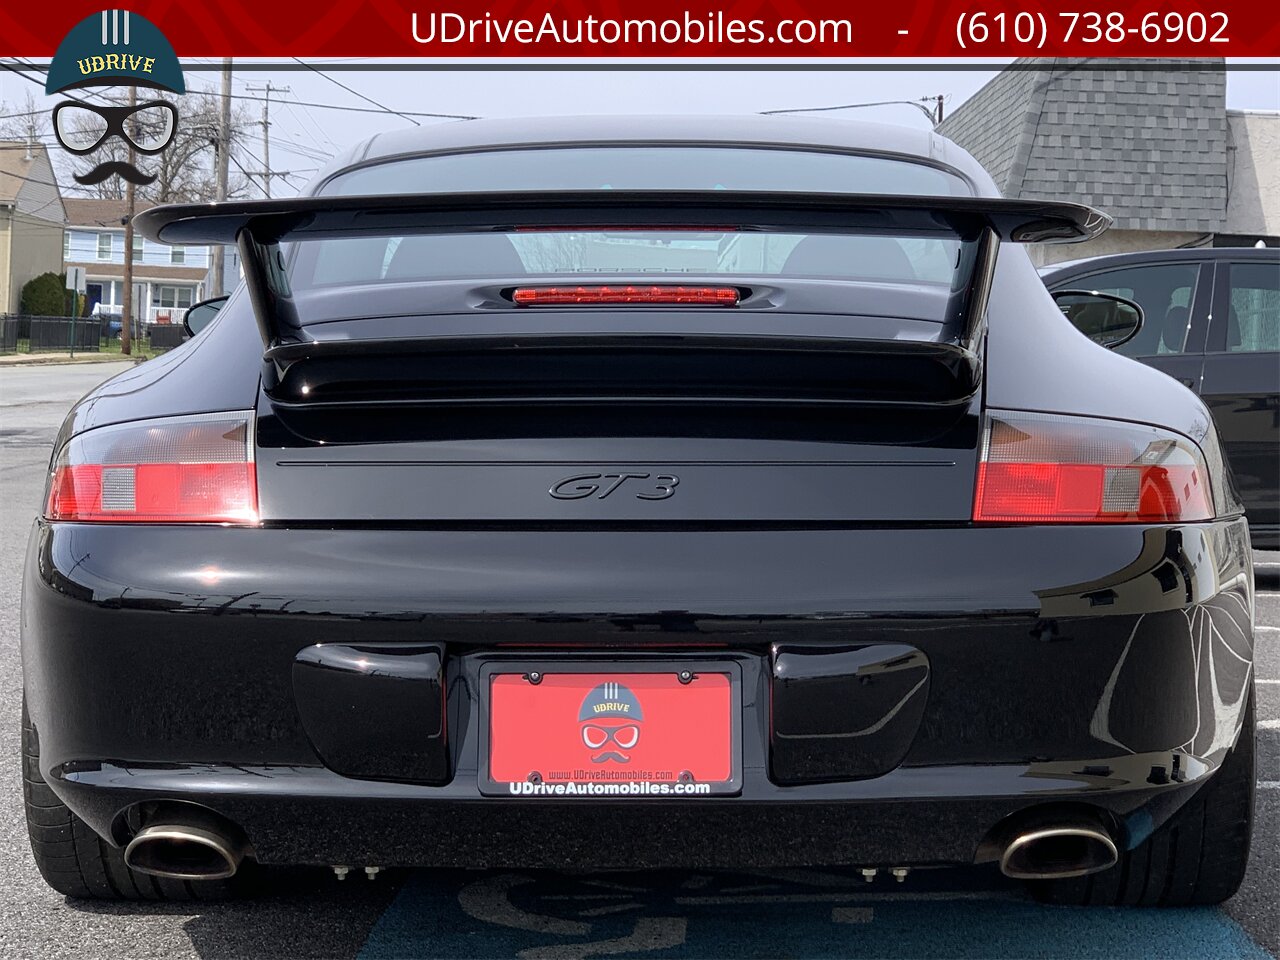 2004 Porsche 911 GT3 996 PCCB Sport Seats Red Stitching $118k MSRP   - Photo 7 - West Chester, PA 19382